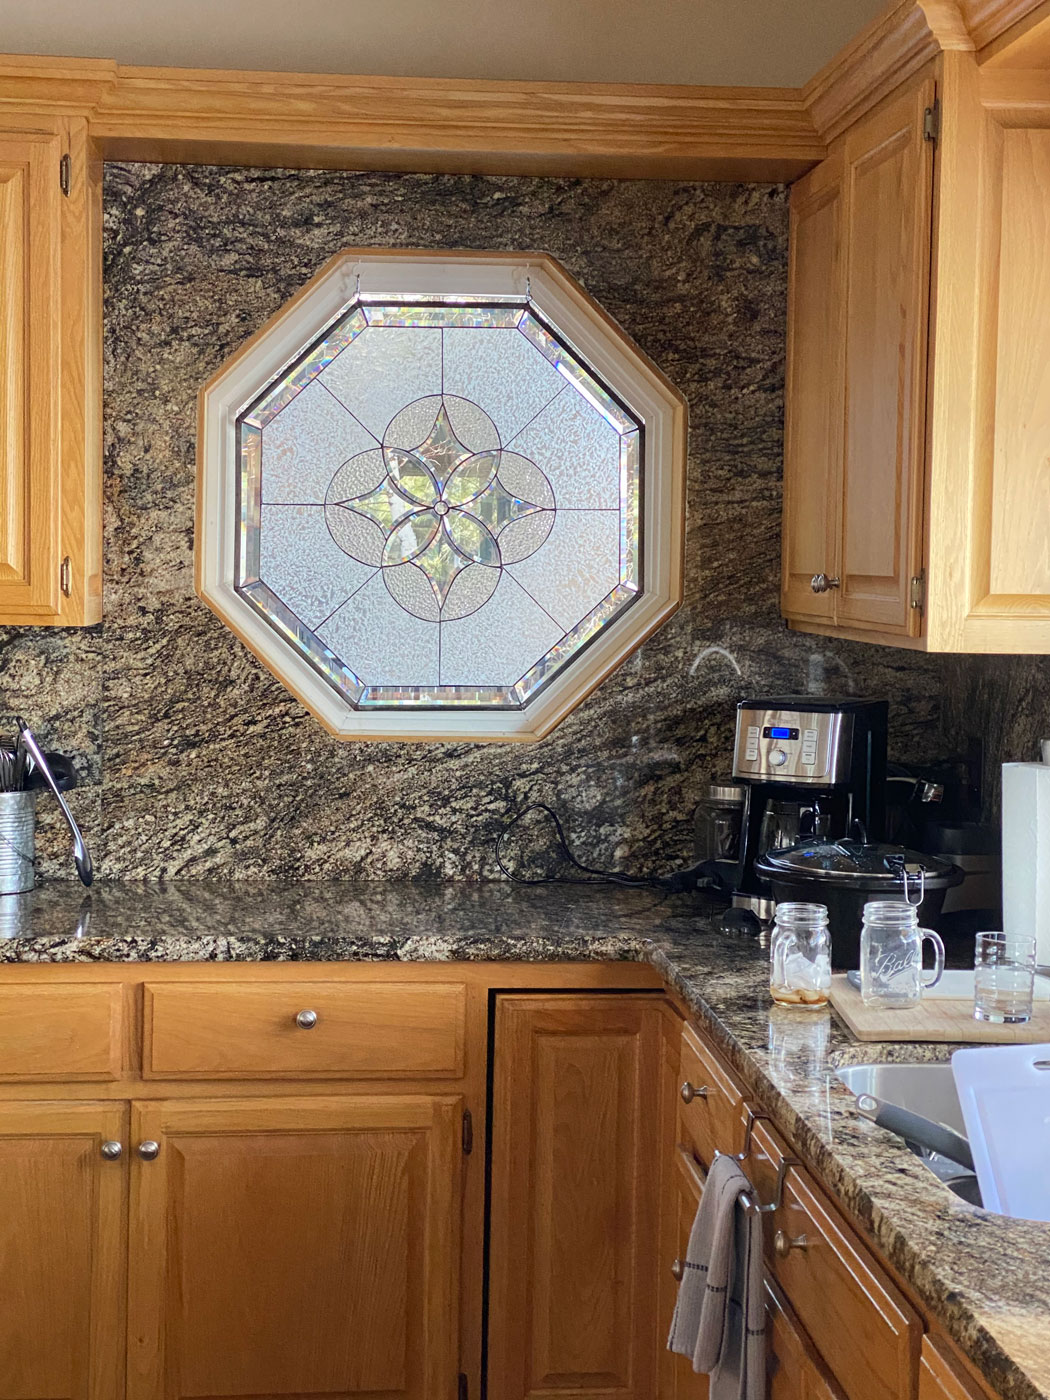 Beautiful octagon Stained Glass Installed in a Kitchen